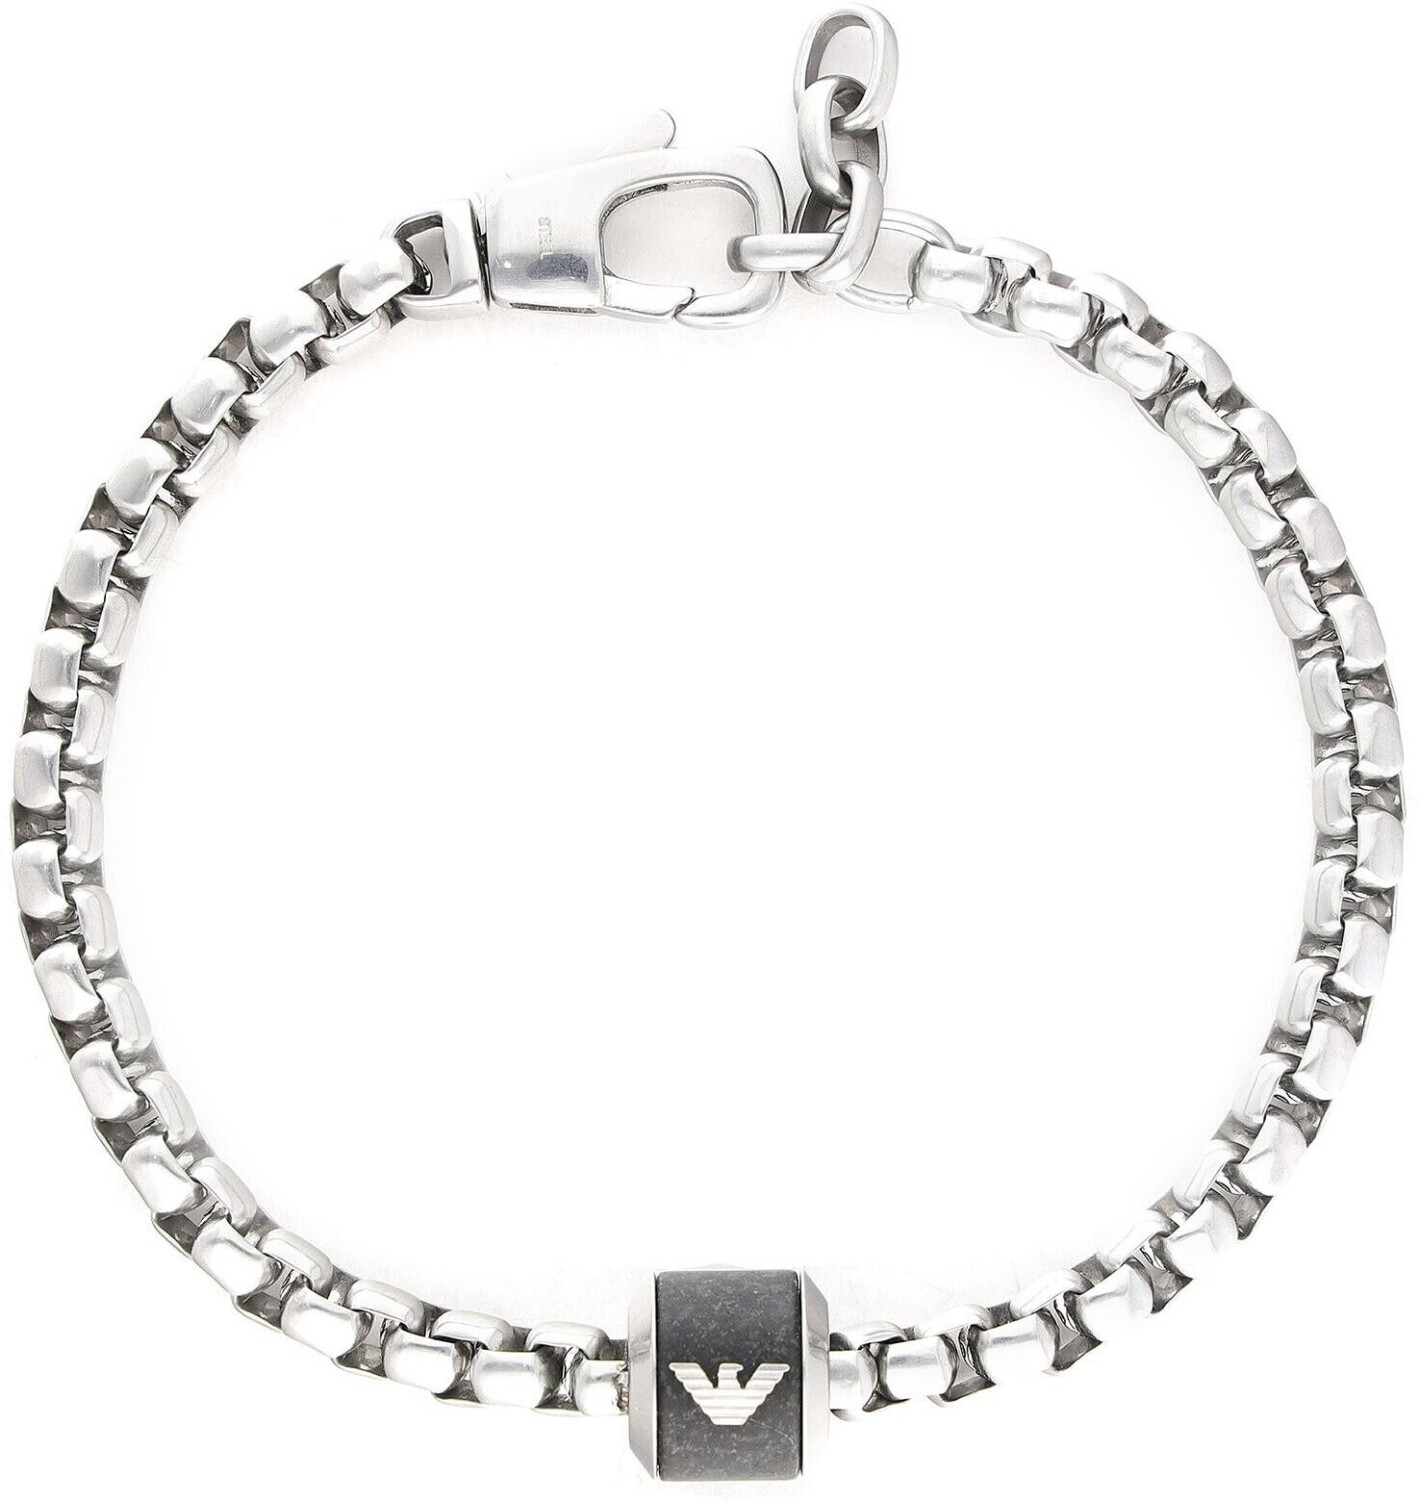 Buy Emporio Armani Bracelet (EGS2911040) from £77.76 (Today) – Best Deals  on